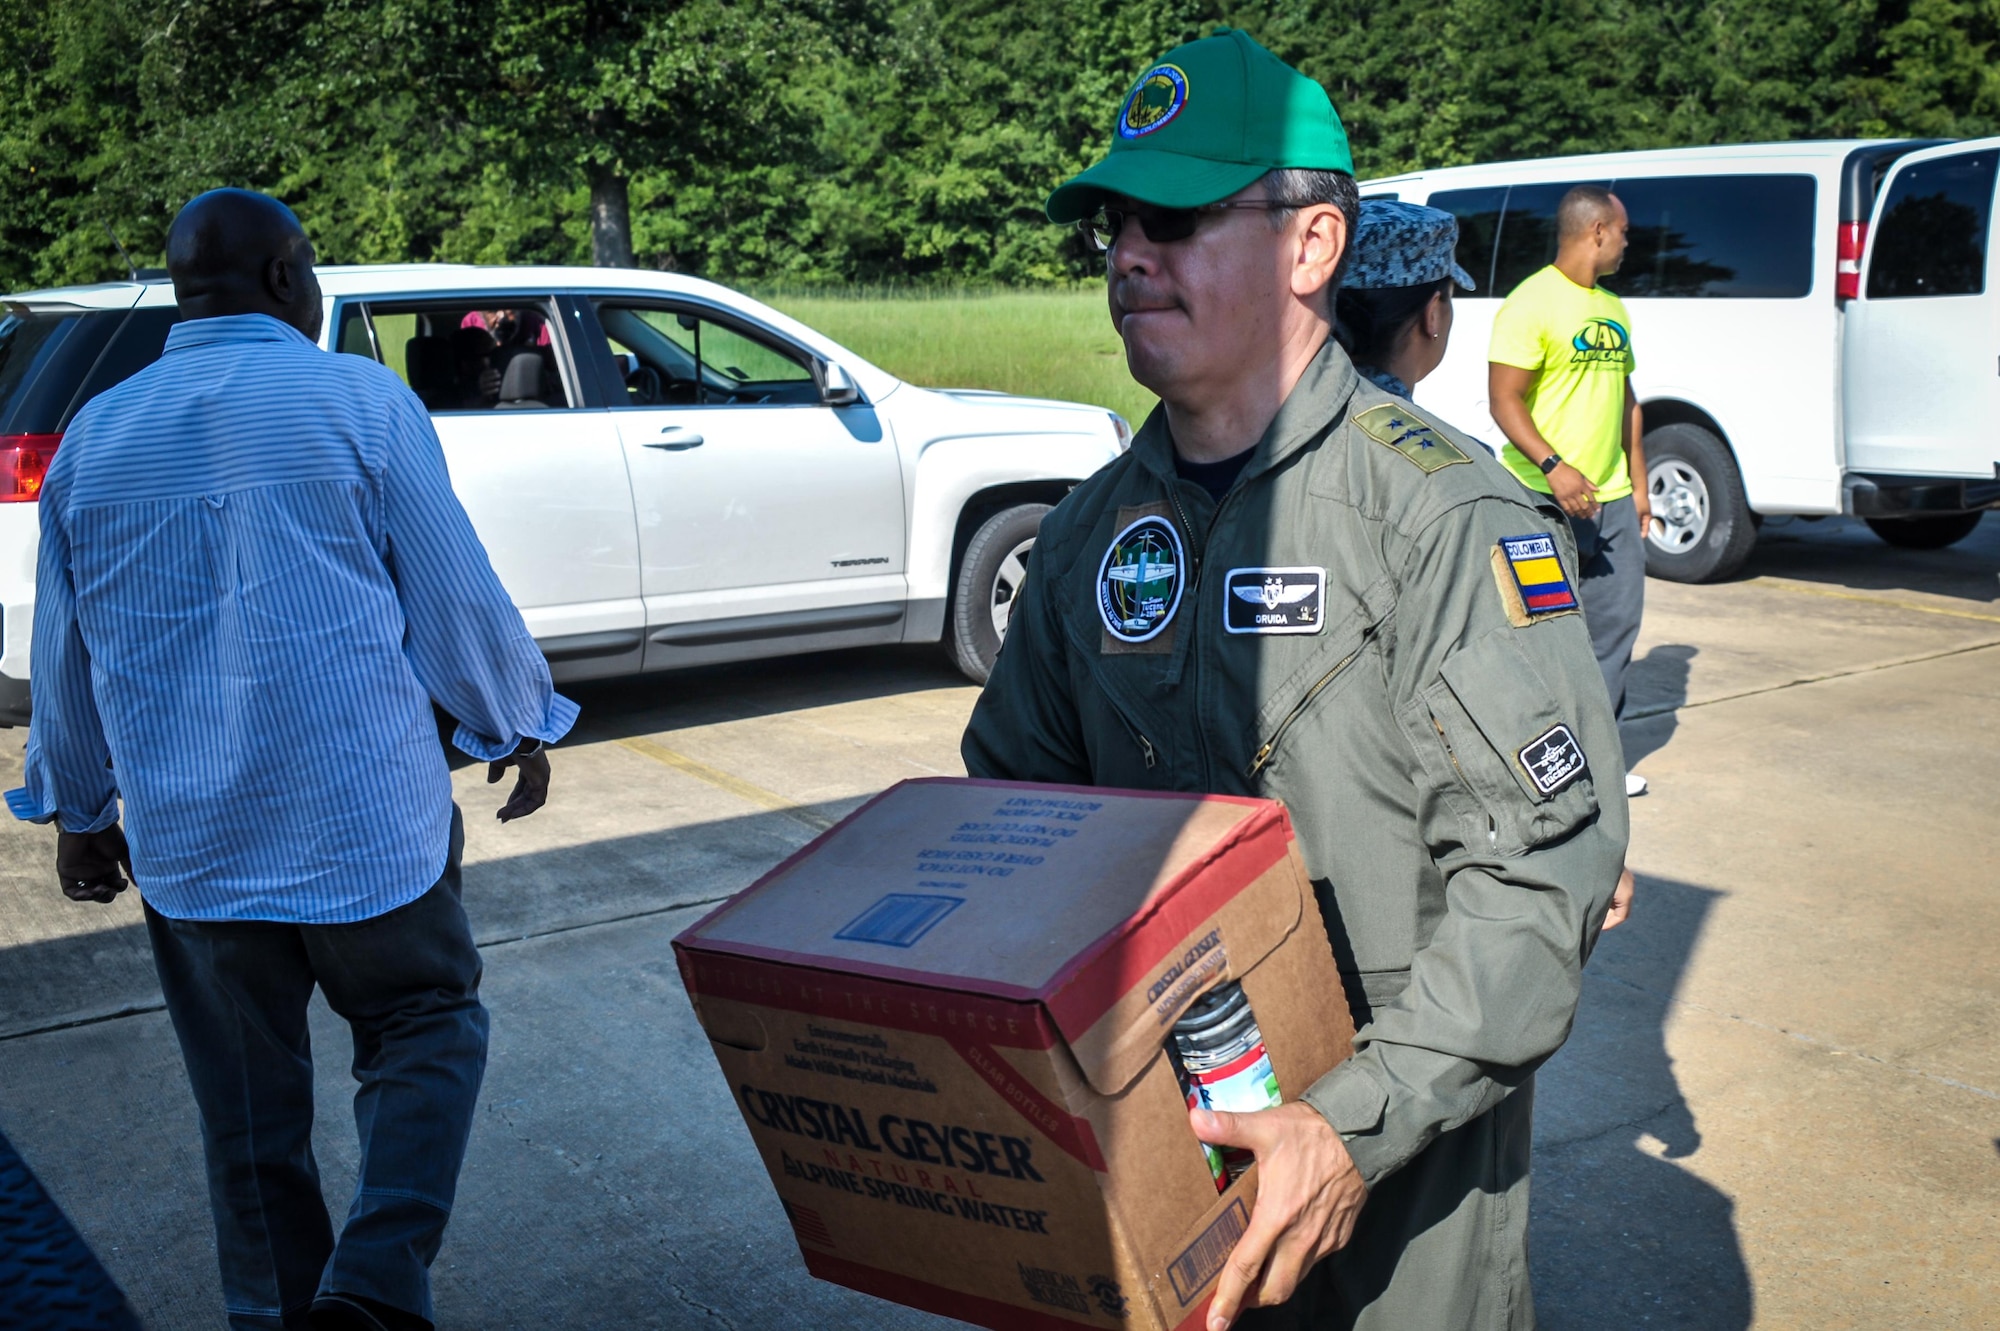 A Colombian Air Force officer carries supplies to an awaiting Salvation Army truck in Bossier City, La., Aug. 27, 2016. Colombian Airmen visiting Barksdale Air Force Base, La., donated supplies to the local Salvation Army for delivery to relief centers in central Louisiana following weeks of torrential rain and flooding in the region. (U.S. Air Force photo / Senior Airman Mozer O. Da Cunha)